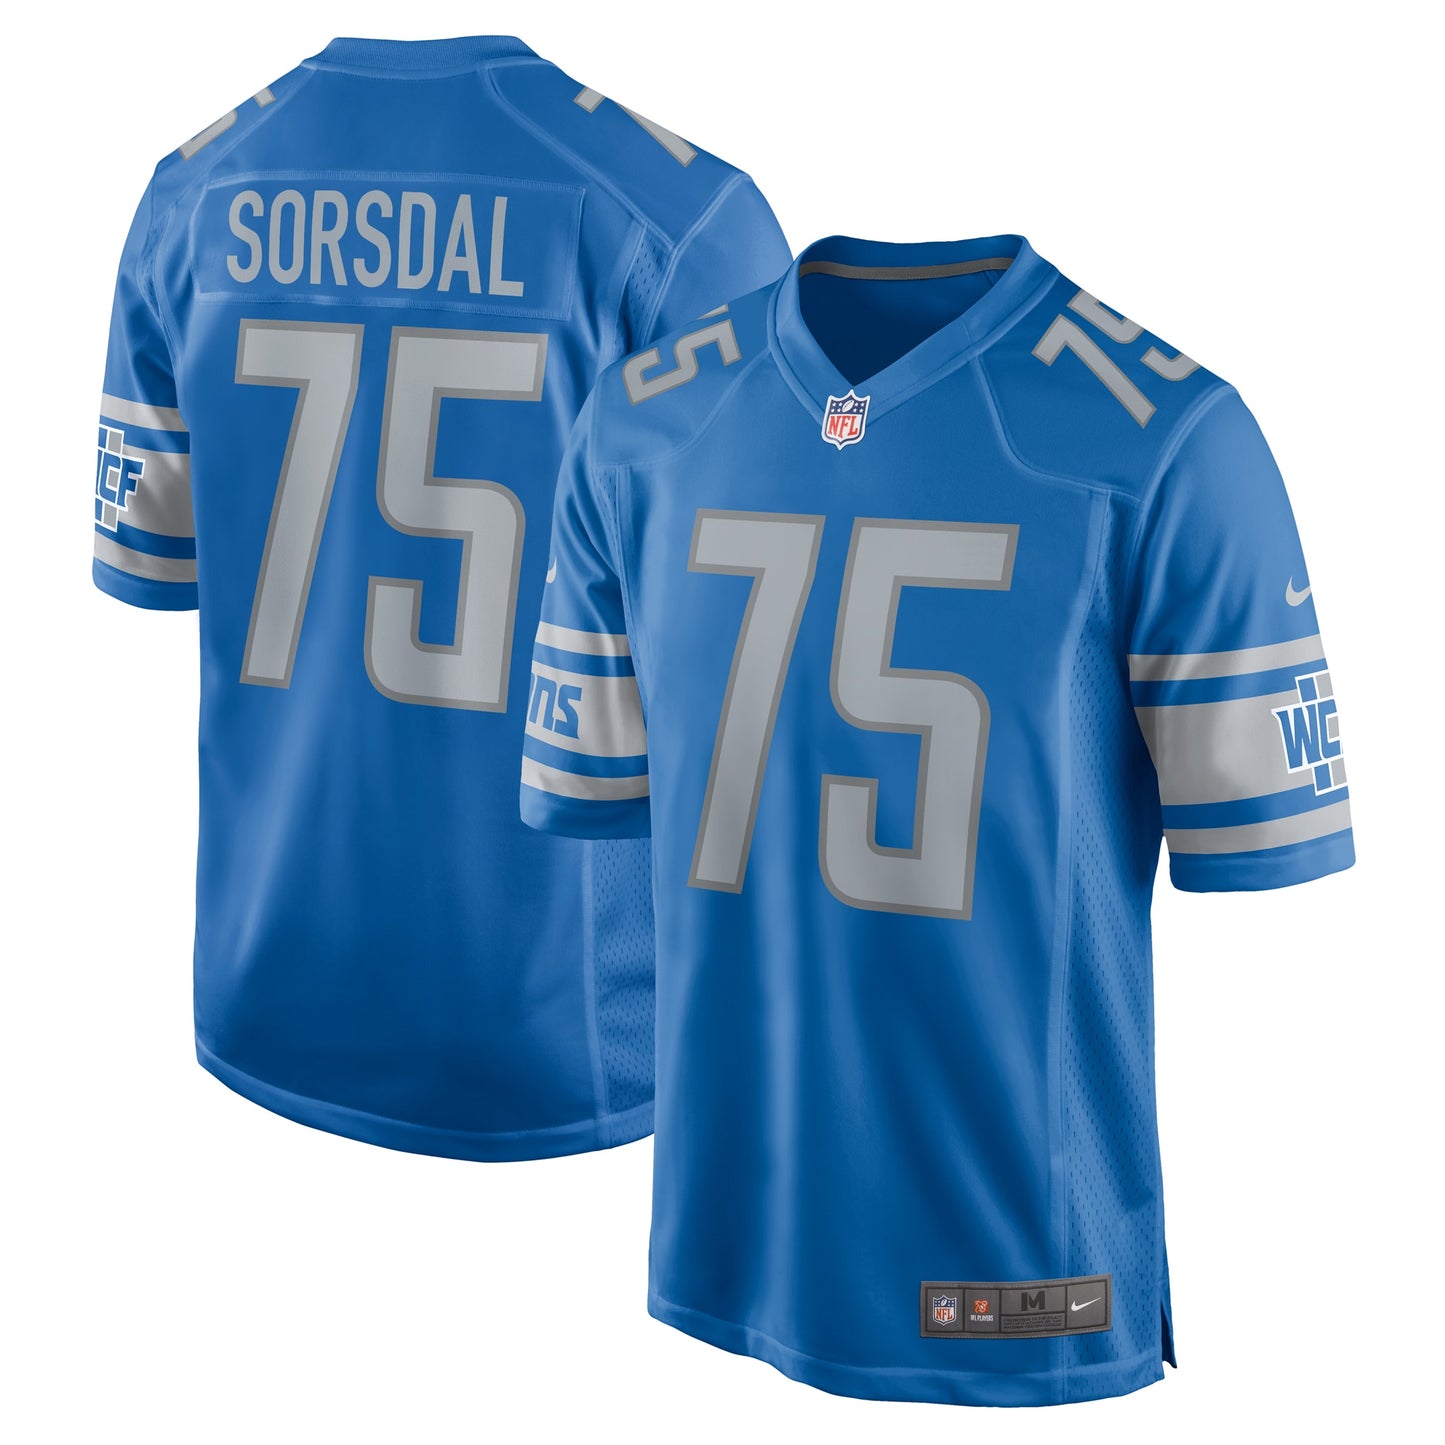 Colby Sorsdal Detroit Lions Nike Team Game Jersey - Blue